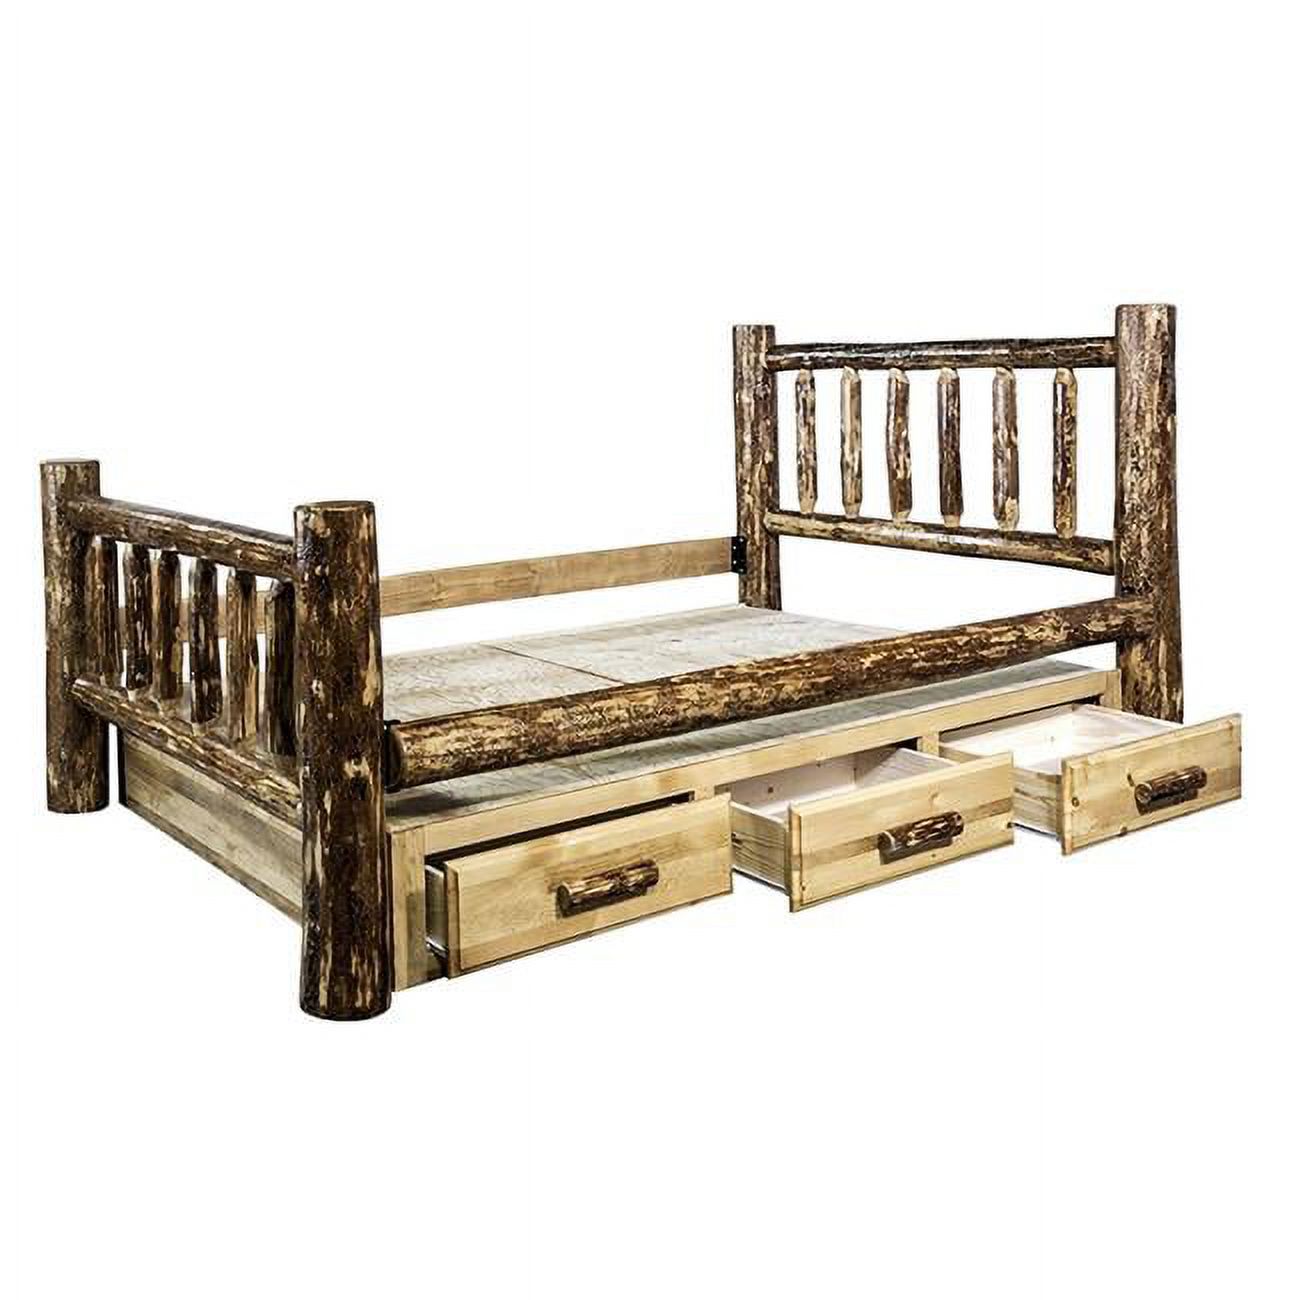 Glacier Country Collection California King Bed w/ Storage - image 1 of 5